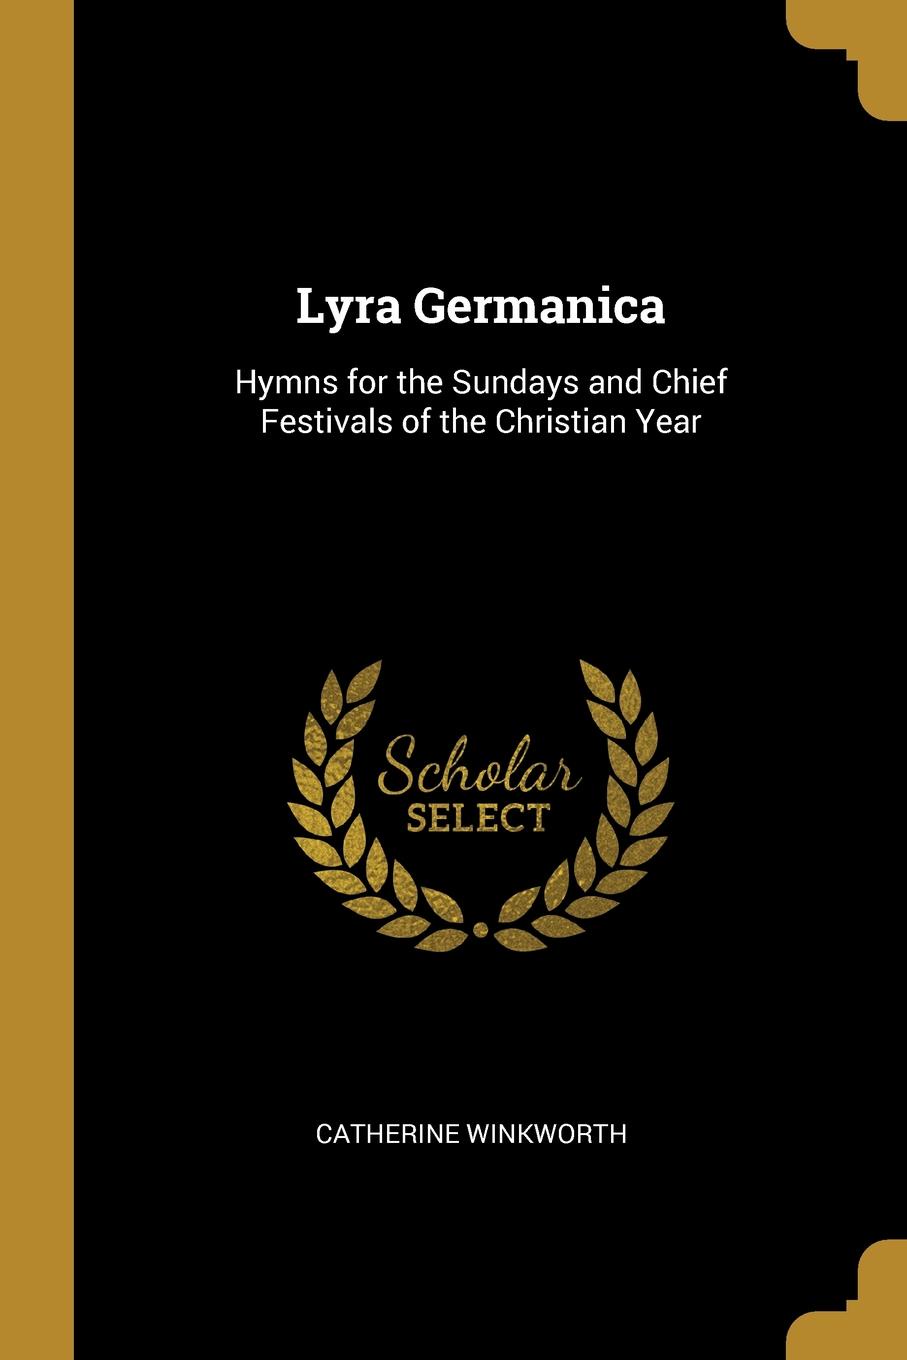 Lyra Germanica. Hymns for the Sundays and Chief Festivals of the Christian Year